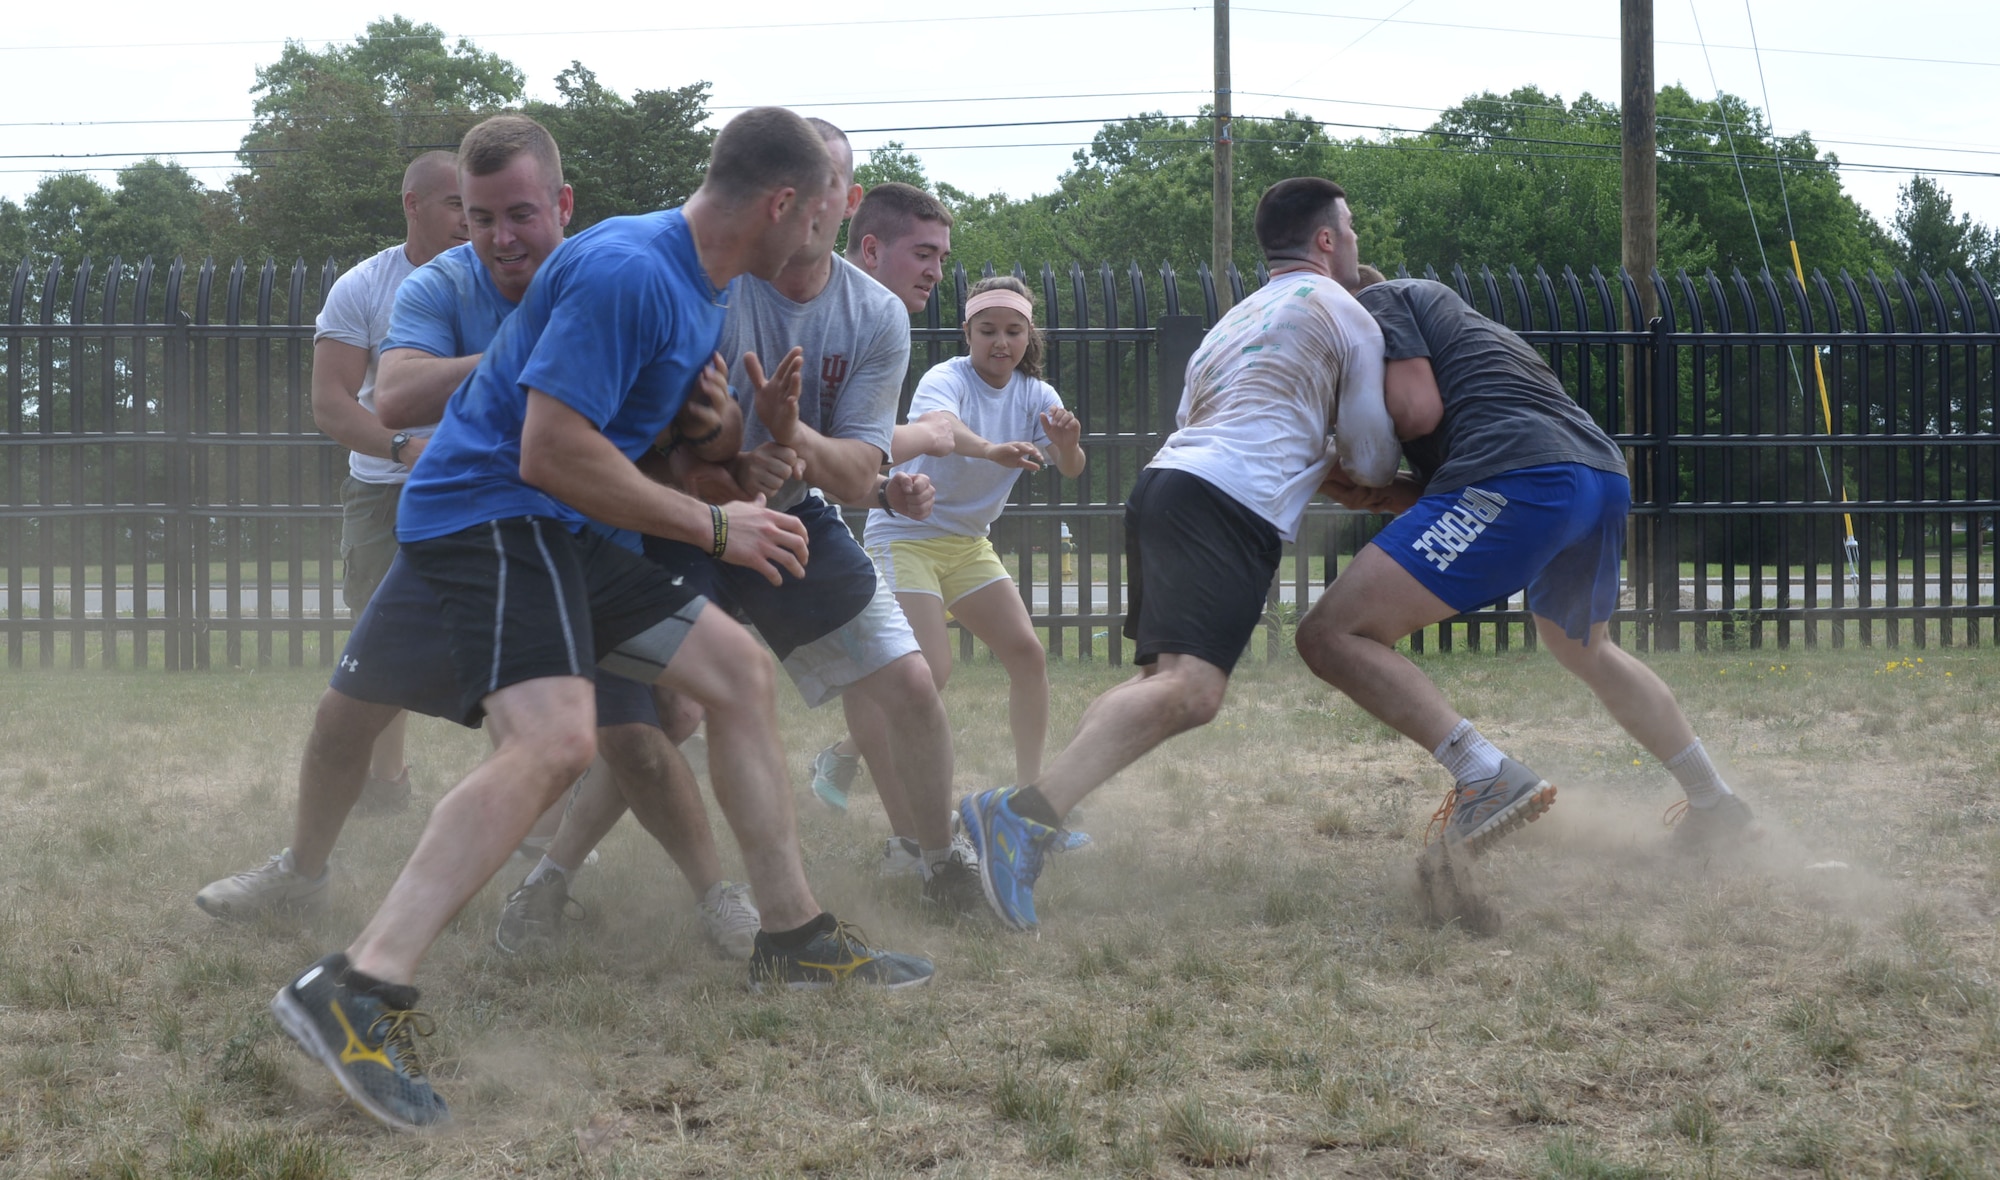 Members of the 157th Air Refueling Wing Student Flight battle it out in a game of capture the flag during physical training June 14, 2015 at Pease Air National Guard Base, N.H. Student Flight prepares new members of the New Hampshire Air National Guard for Basic Military Training and technical school. (N.H. Air National Guard photo by Airman Ashlyn J. Correia/ RELEASED)